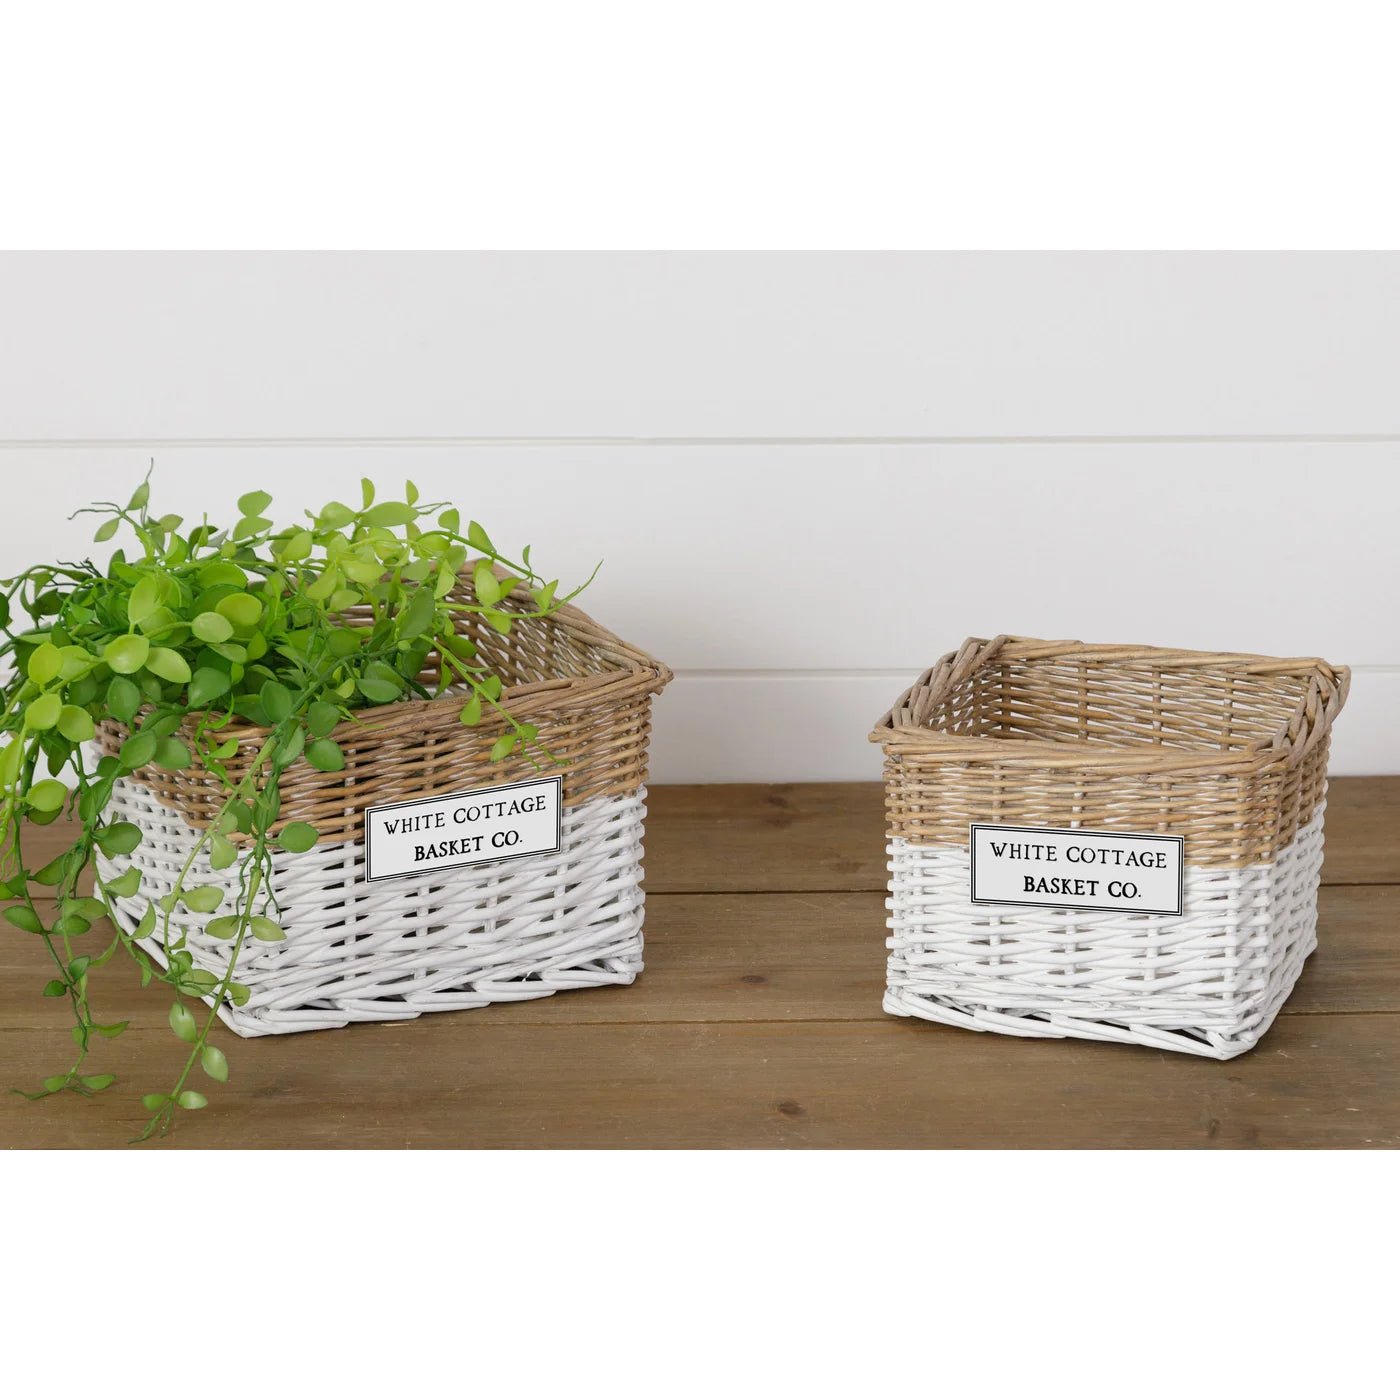 White Cottage Basket Co. Two-Toned Baskets